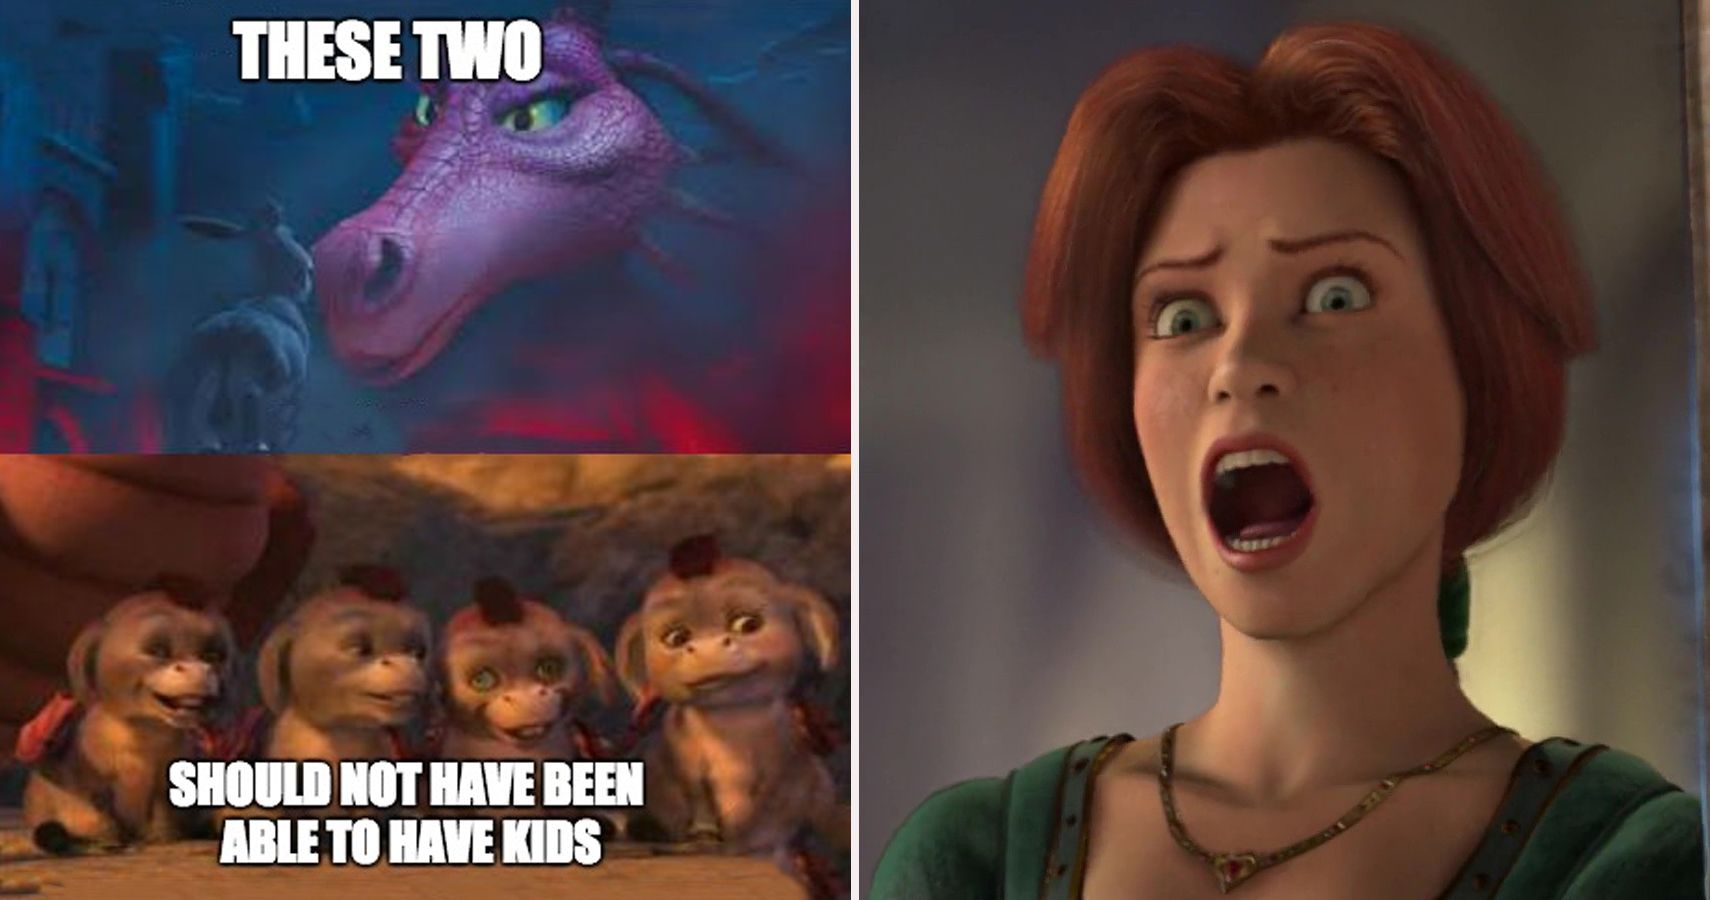 Now we know why Fiona loved Shrek - Imgflip